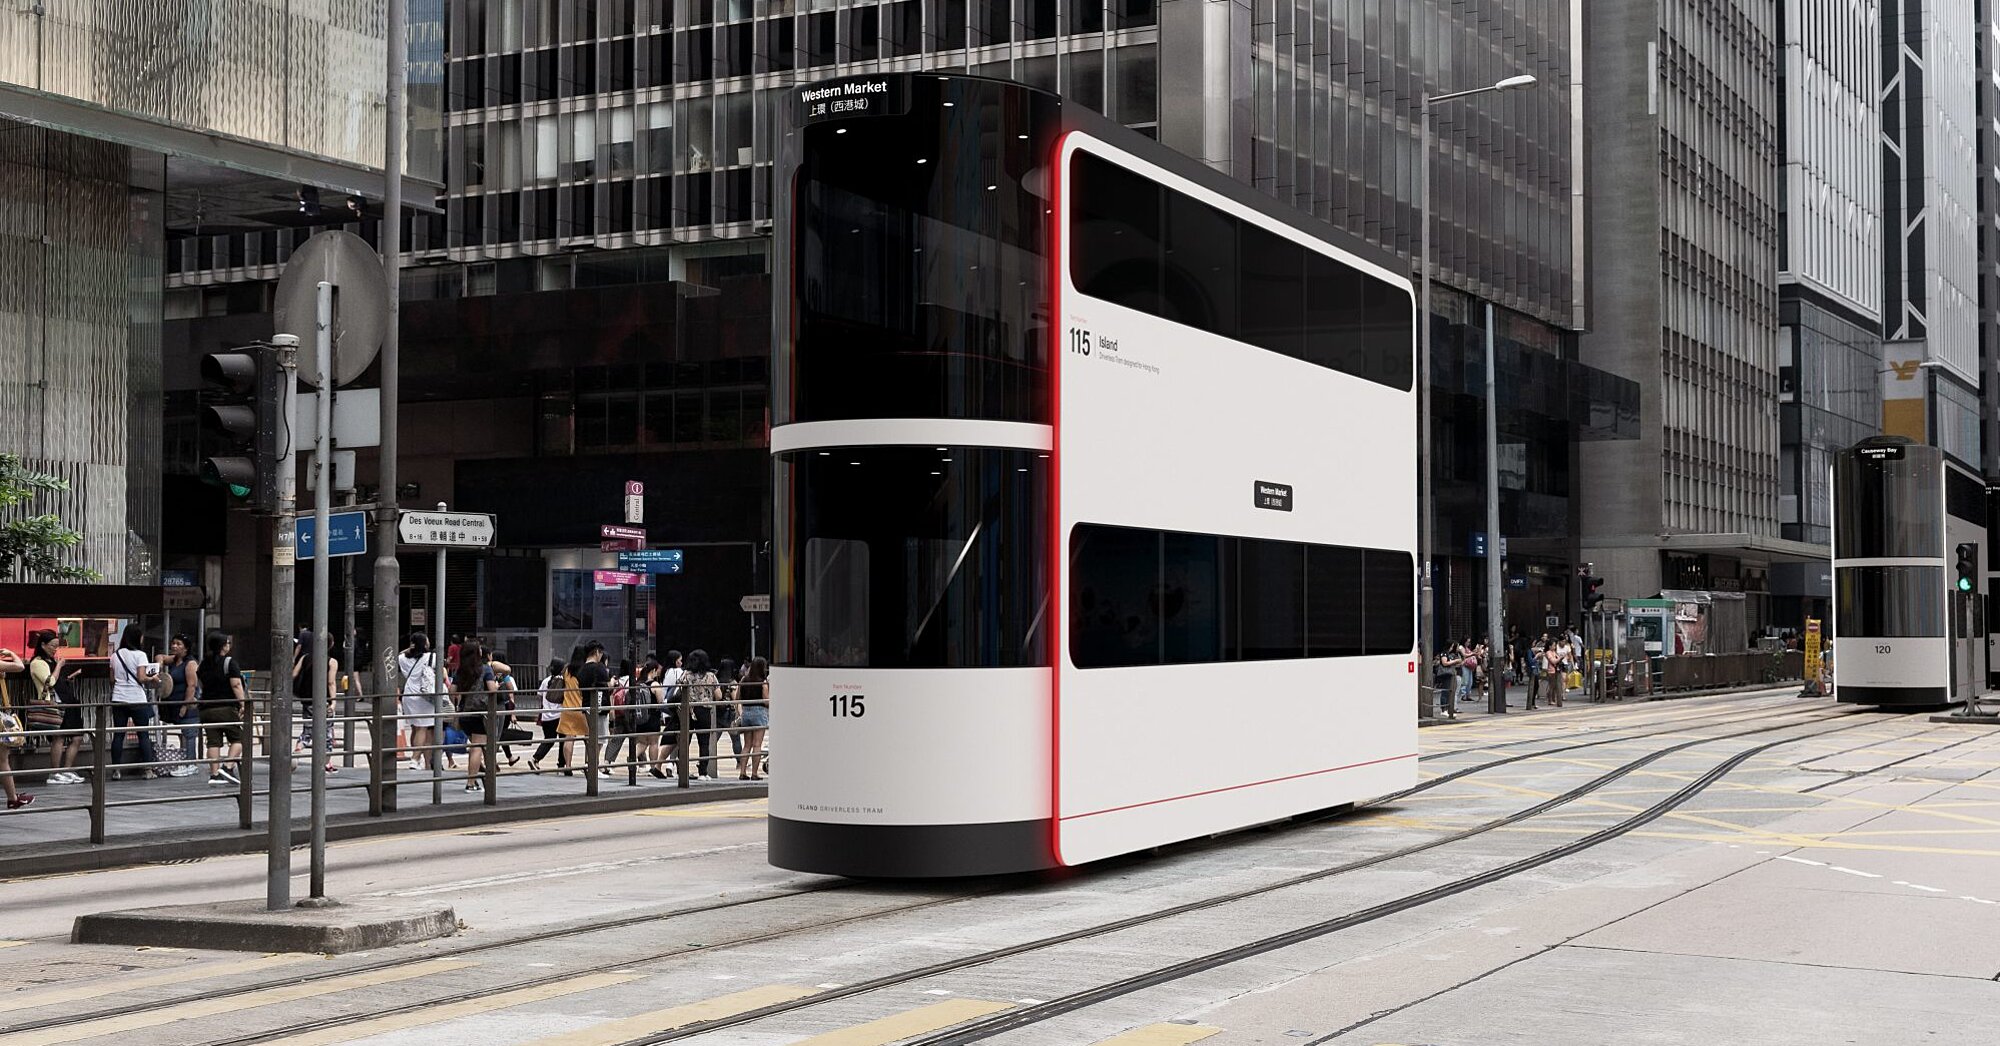 This Super-futuristic Driverless Tram Design From Hong Kong May Be Perfect for Post-COVID-19 Transport